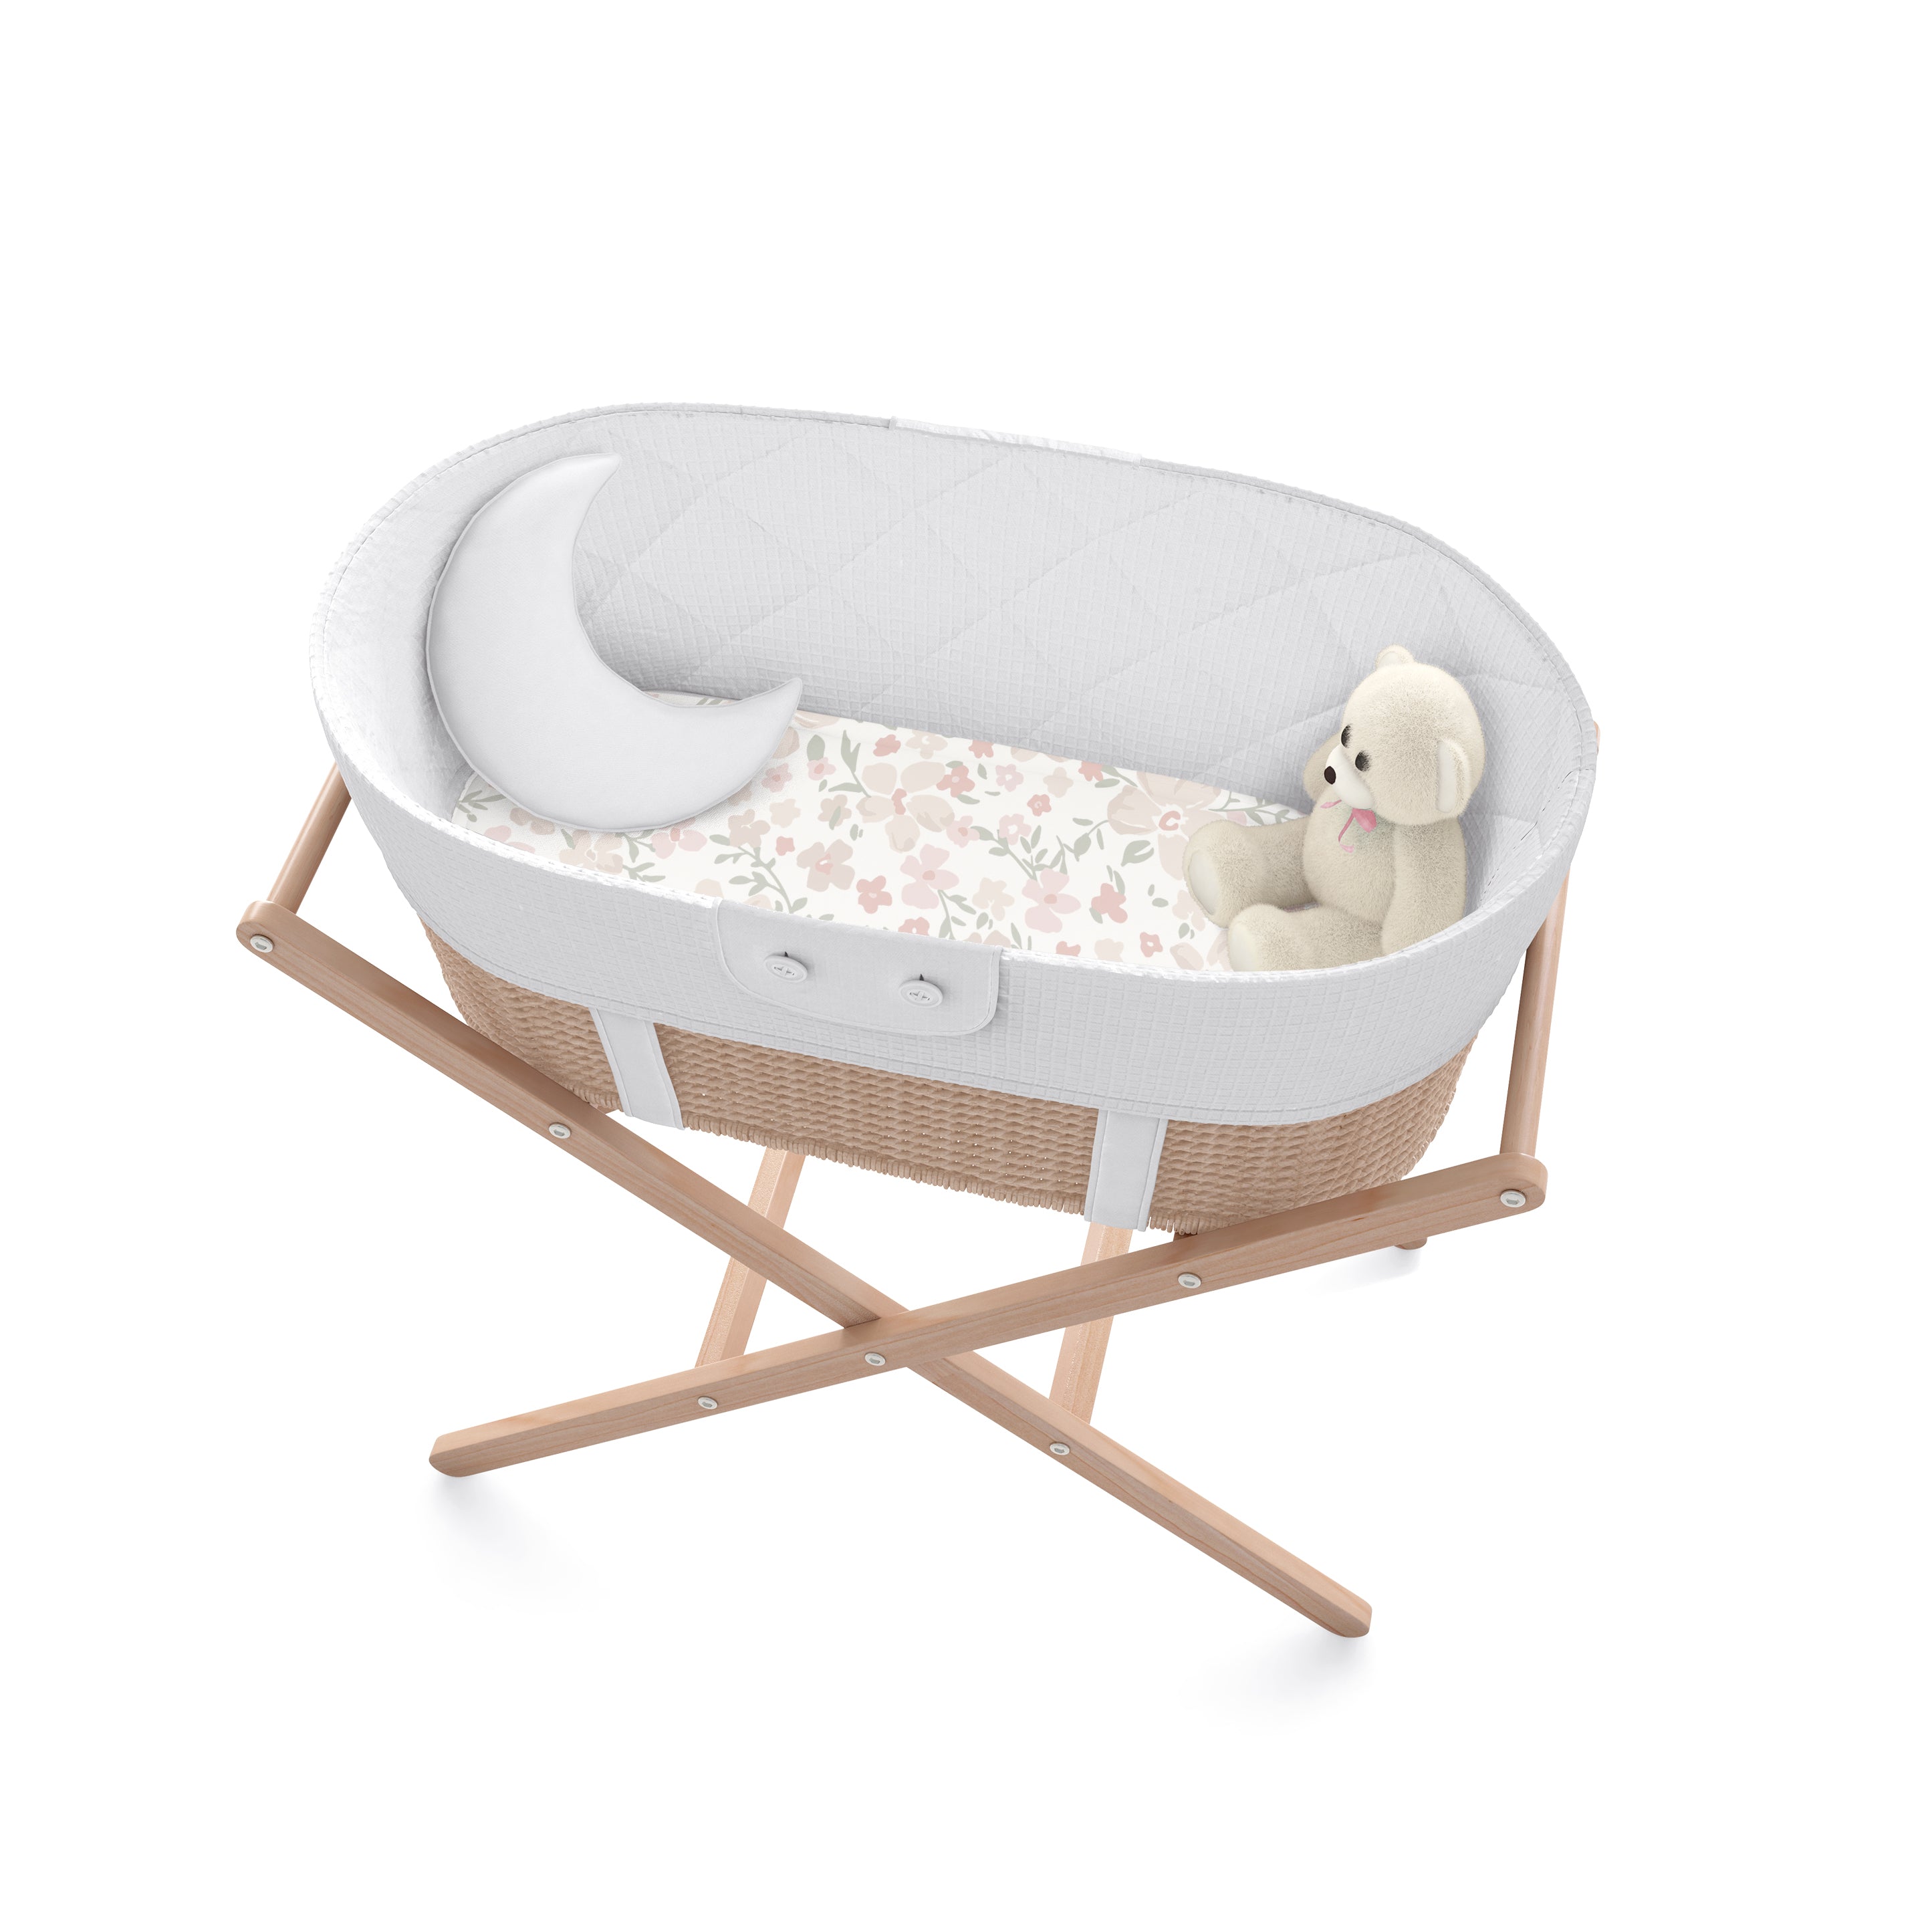 A modern baby bassinet on a wooden stand, featuring a white quilted texture with a floral patterned mattress and a soft teddy bear inside. it's set against a white background.
Product Name: Makemake Organics Bassinet Fitted Sheet - Blossom & Plaid